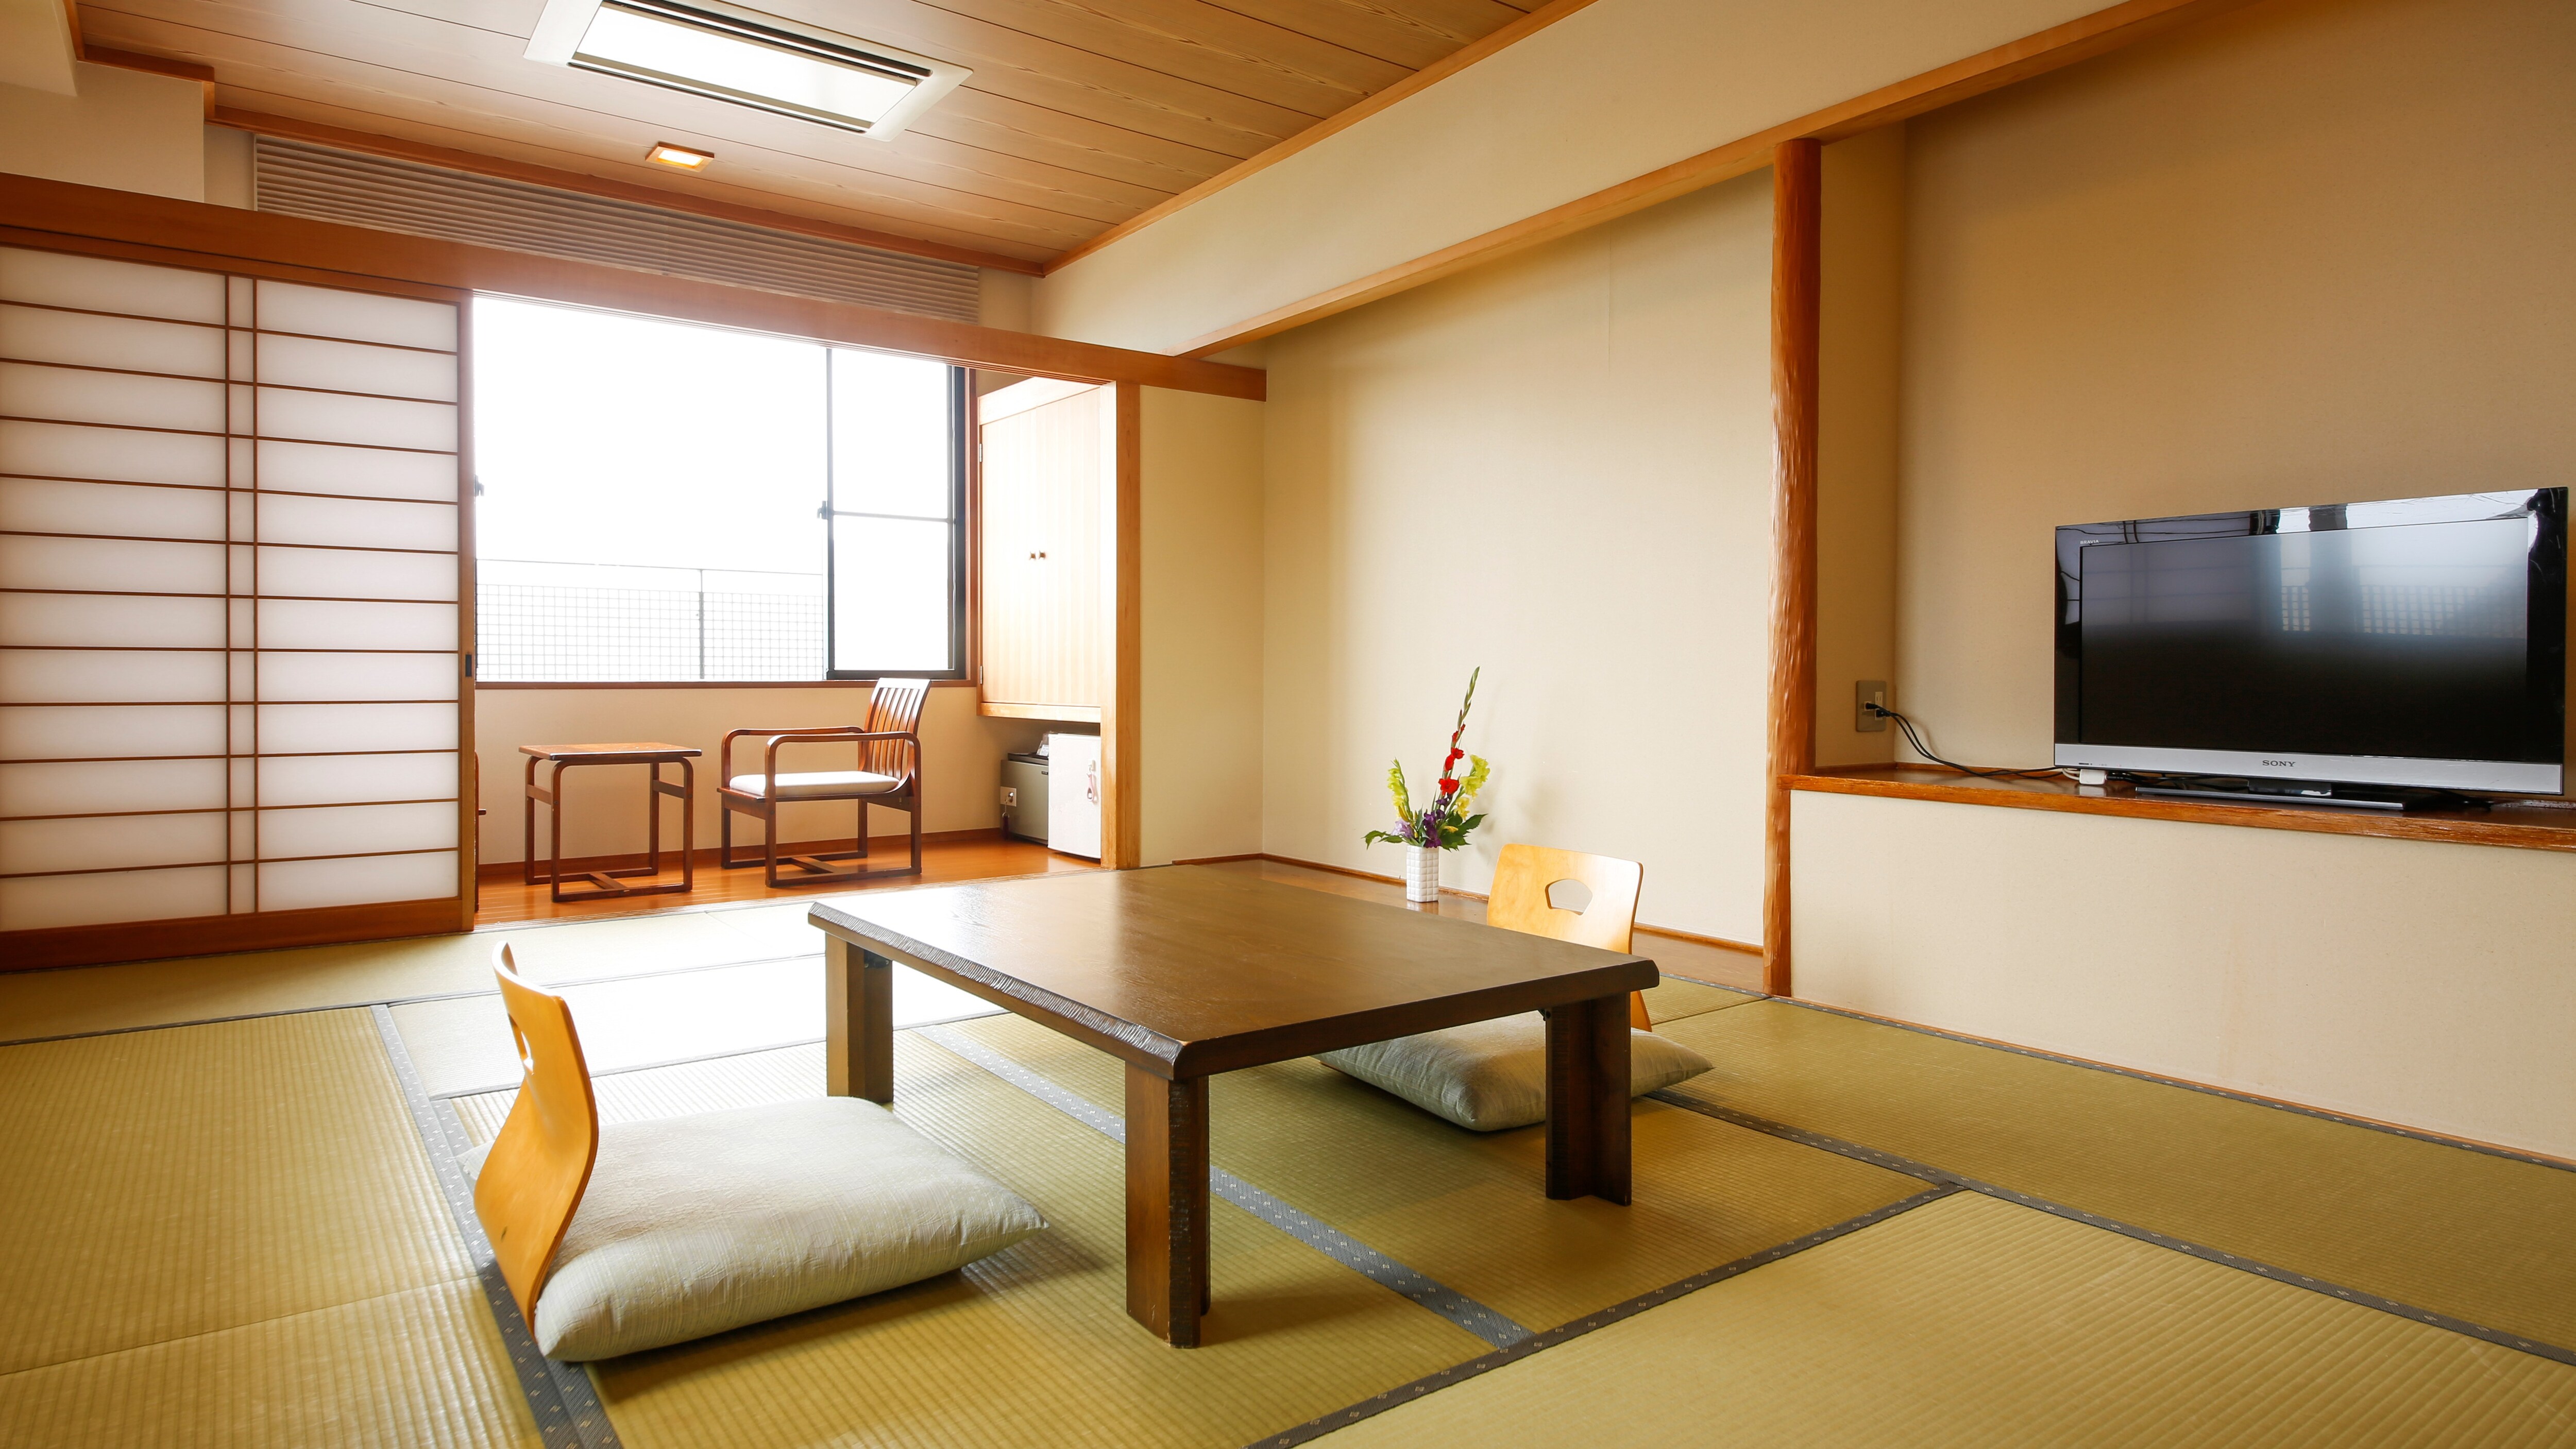 In a clean and quiet Japanese-style room, you can forget about the hustle and bustle of everyday life and relax.